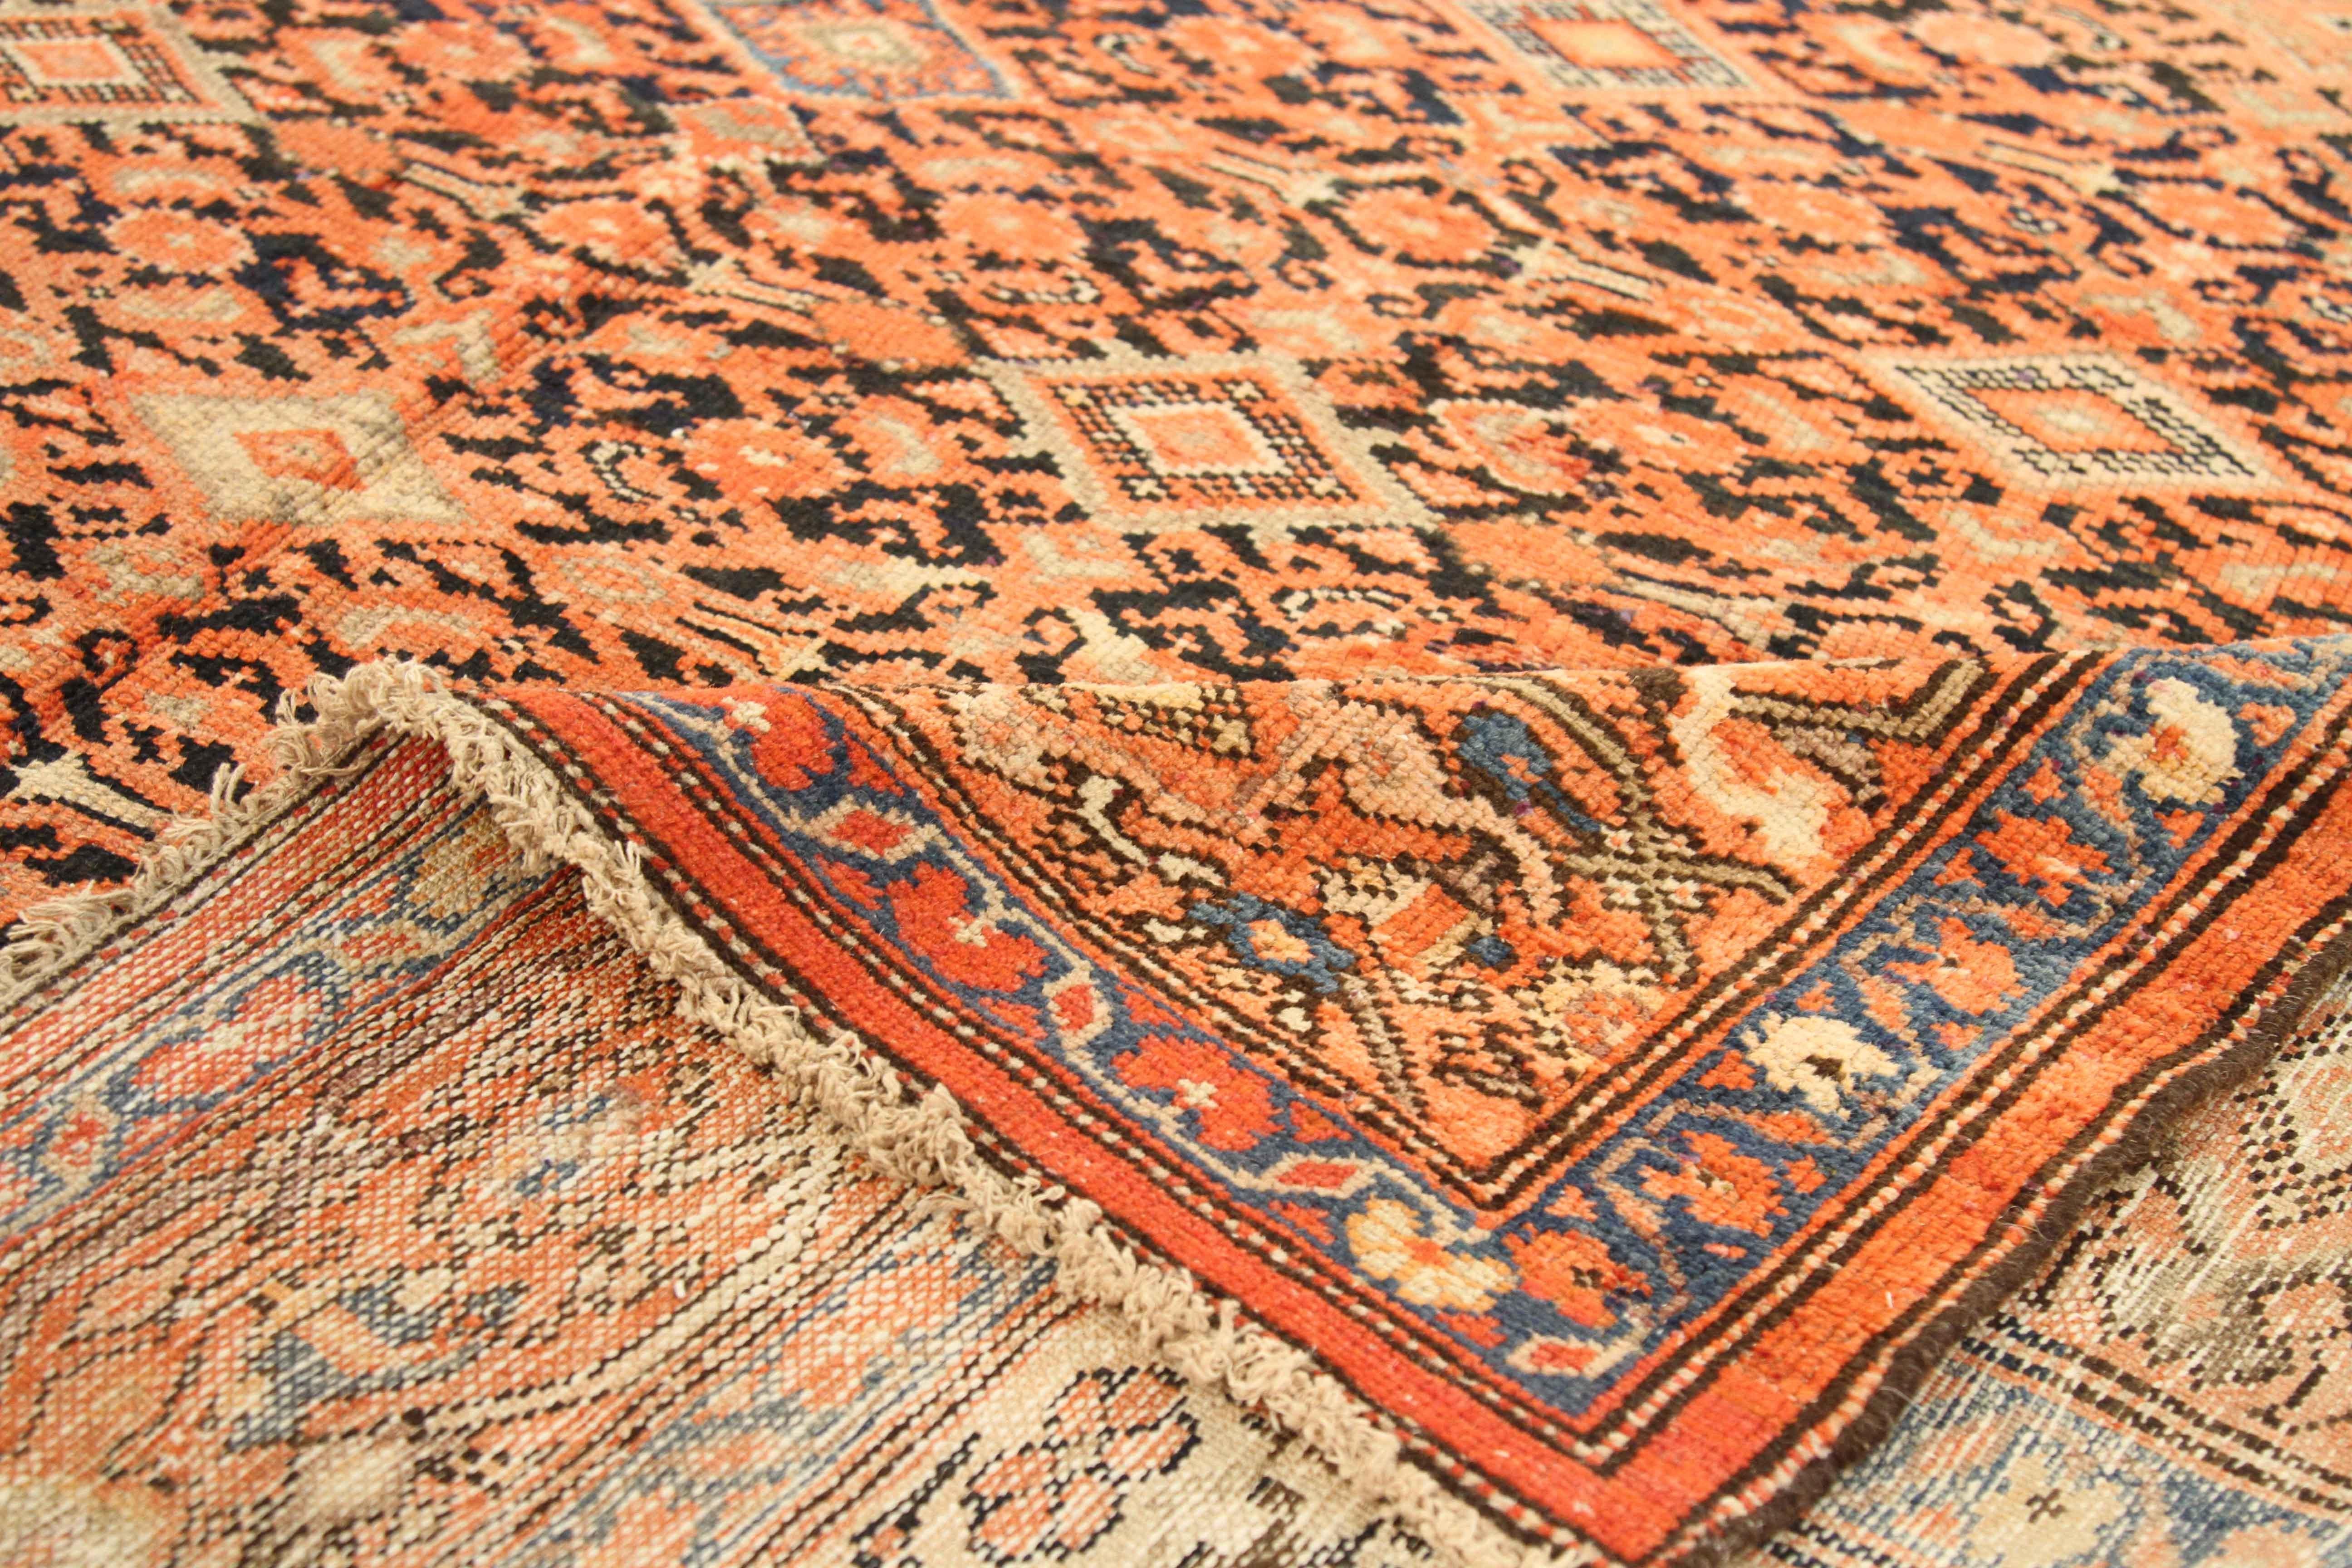 Antique Persian rug made of the finest quality of wool and organic vegetable dyes. It features a large medallion figure on the centre field filled with smaller geometric figures. Around it, the borders boast of floral patterns traditionally used by